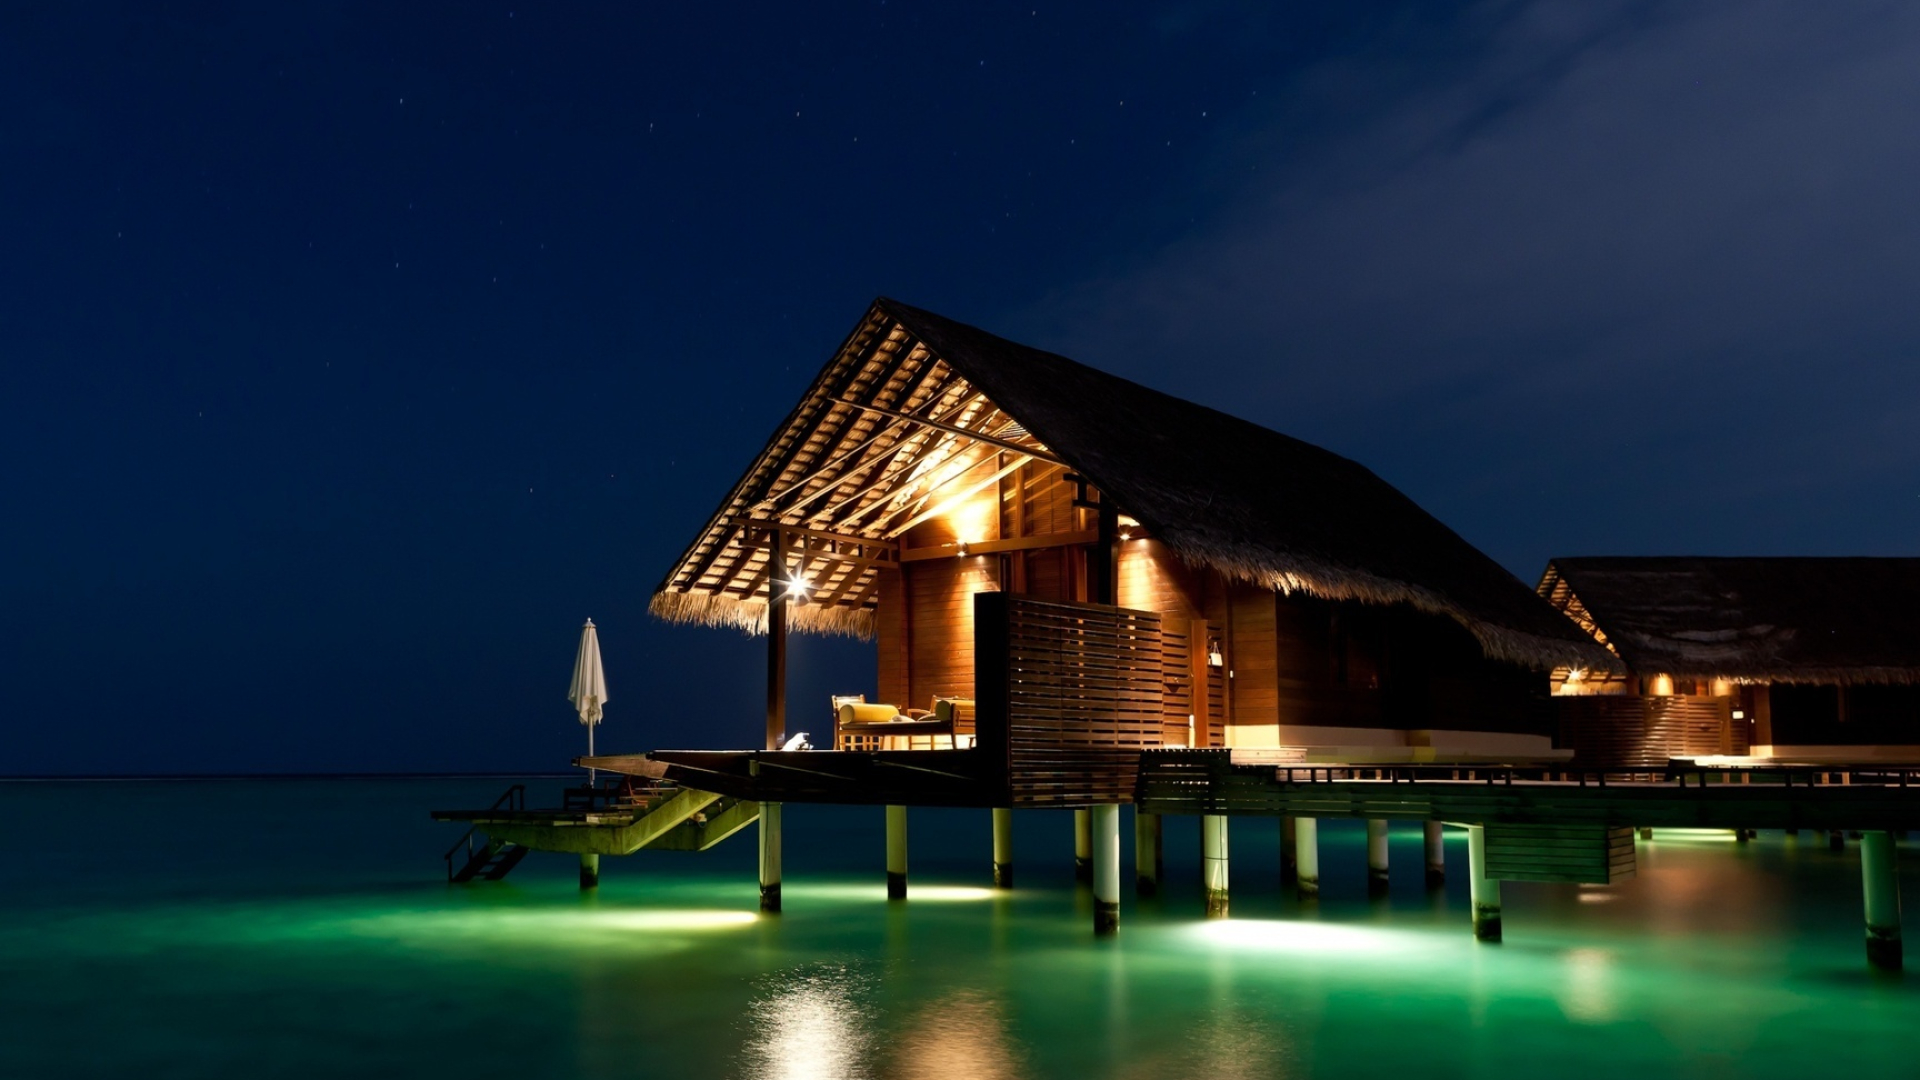 Bungalow: Overwater house at night, Magnificent ocean landform and night sky. 1920x1080 Full HD Background.